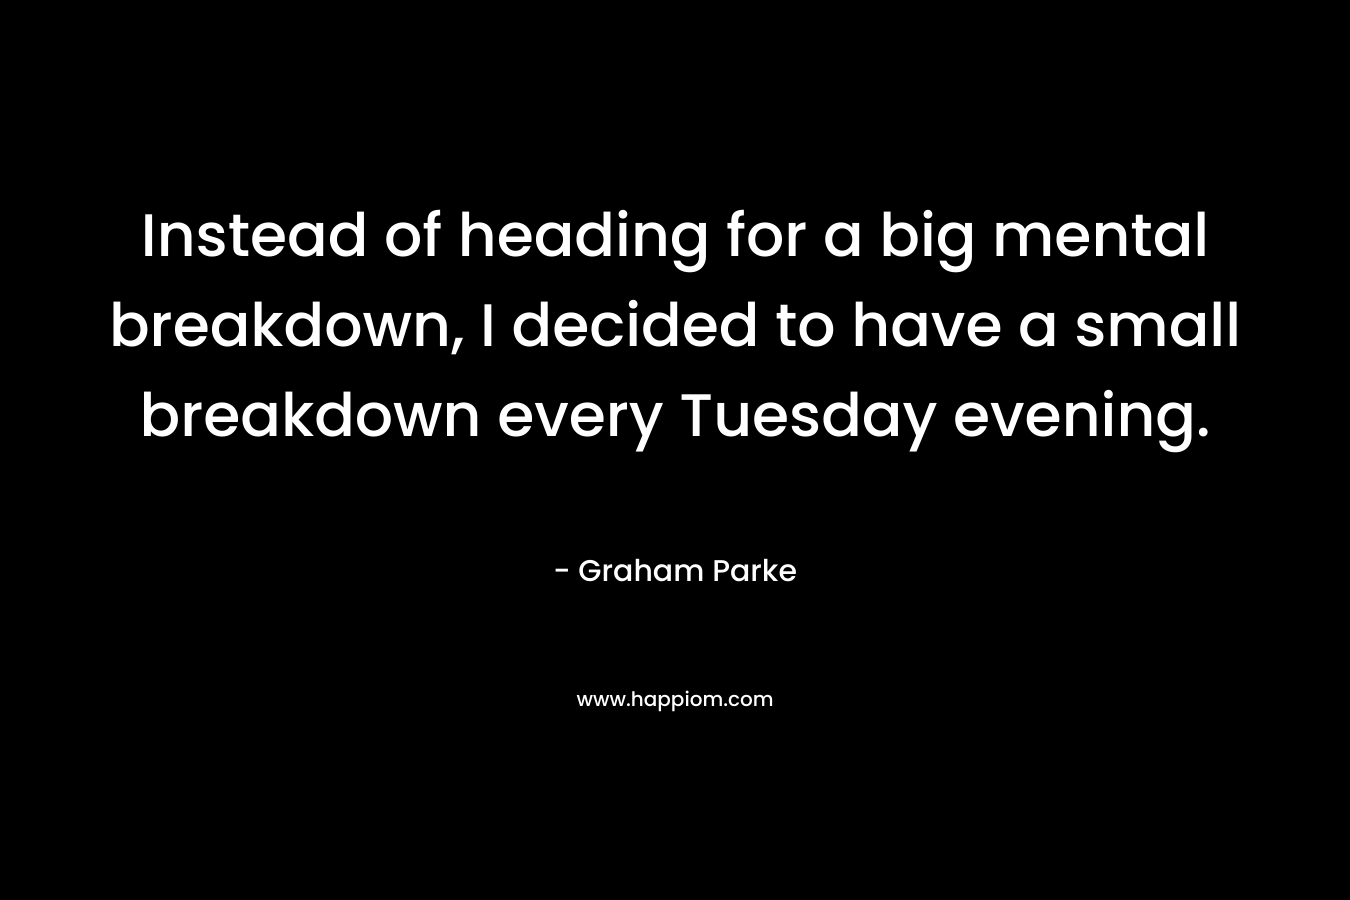 Instead of heading for a big mental breakdown, I decided to have a small breakdown every Tuesday evening. – Graham Parke